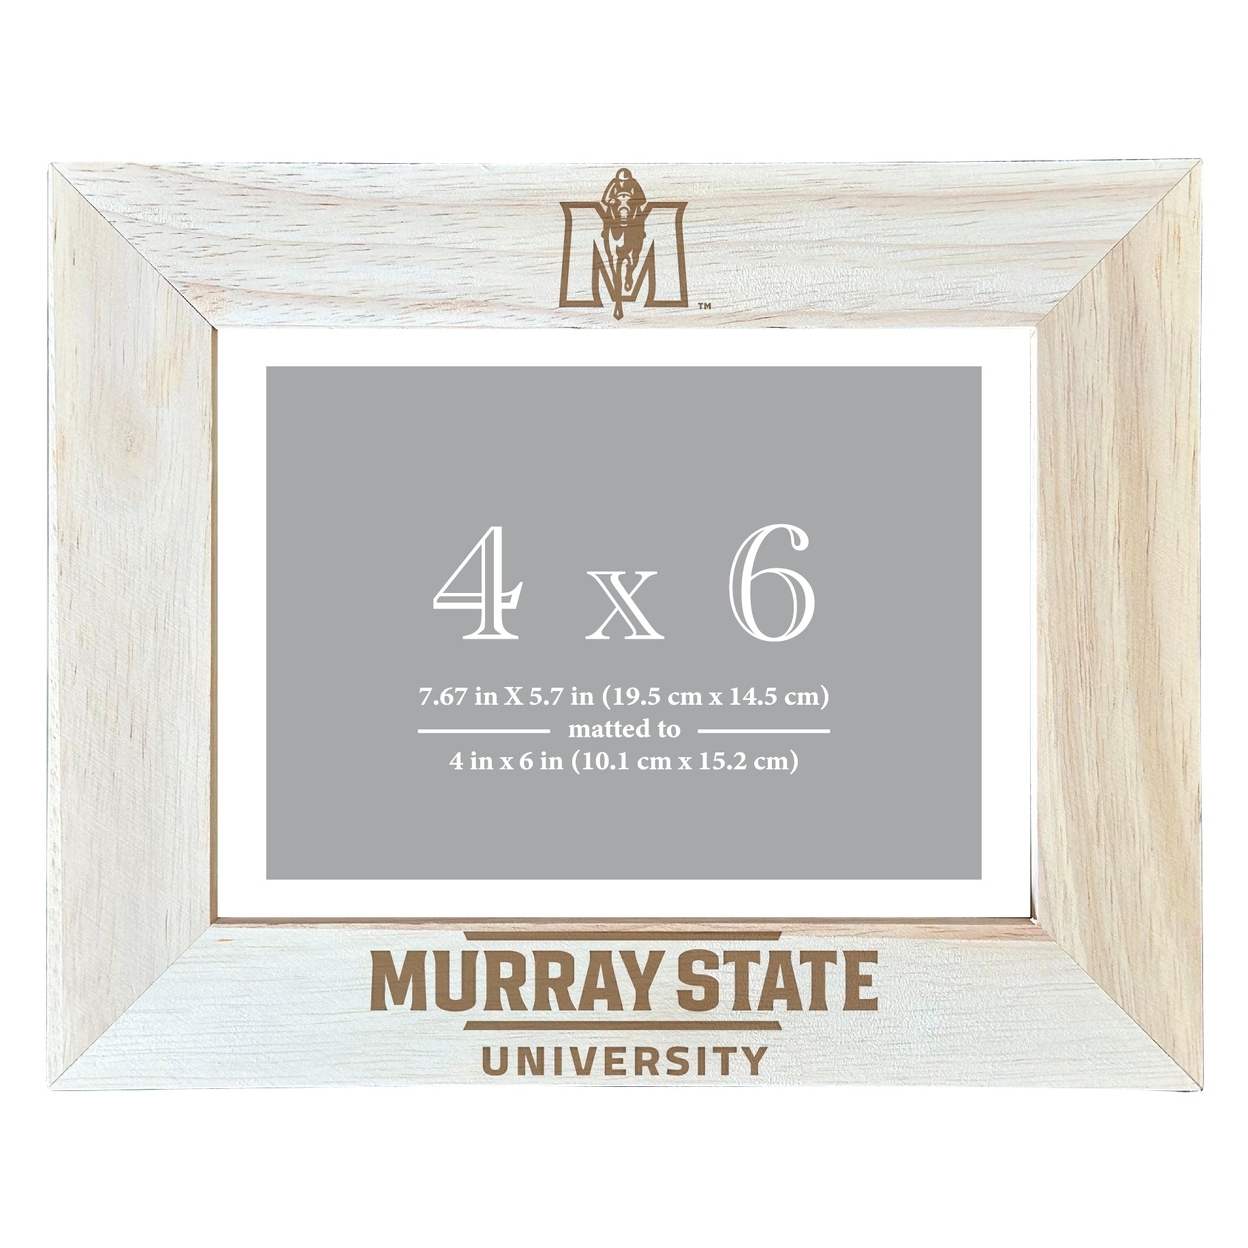 Murray State University Wooden Photo Frame Matted To 4 X 6 Inch - Etched